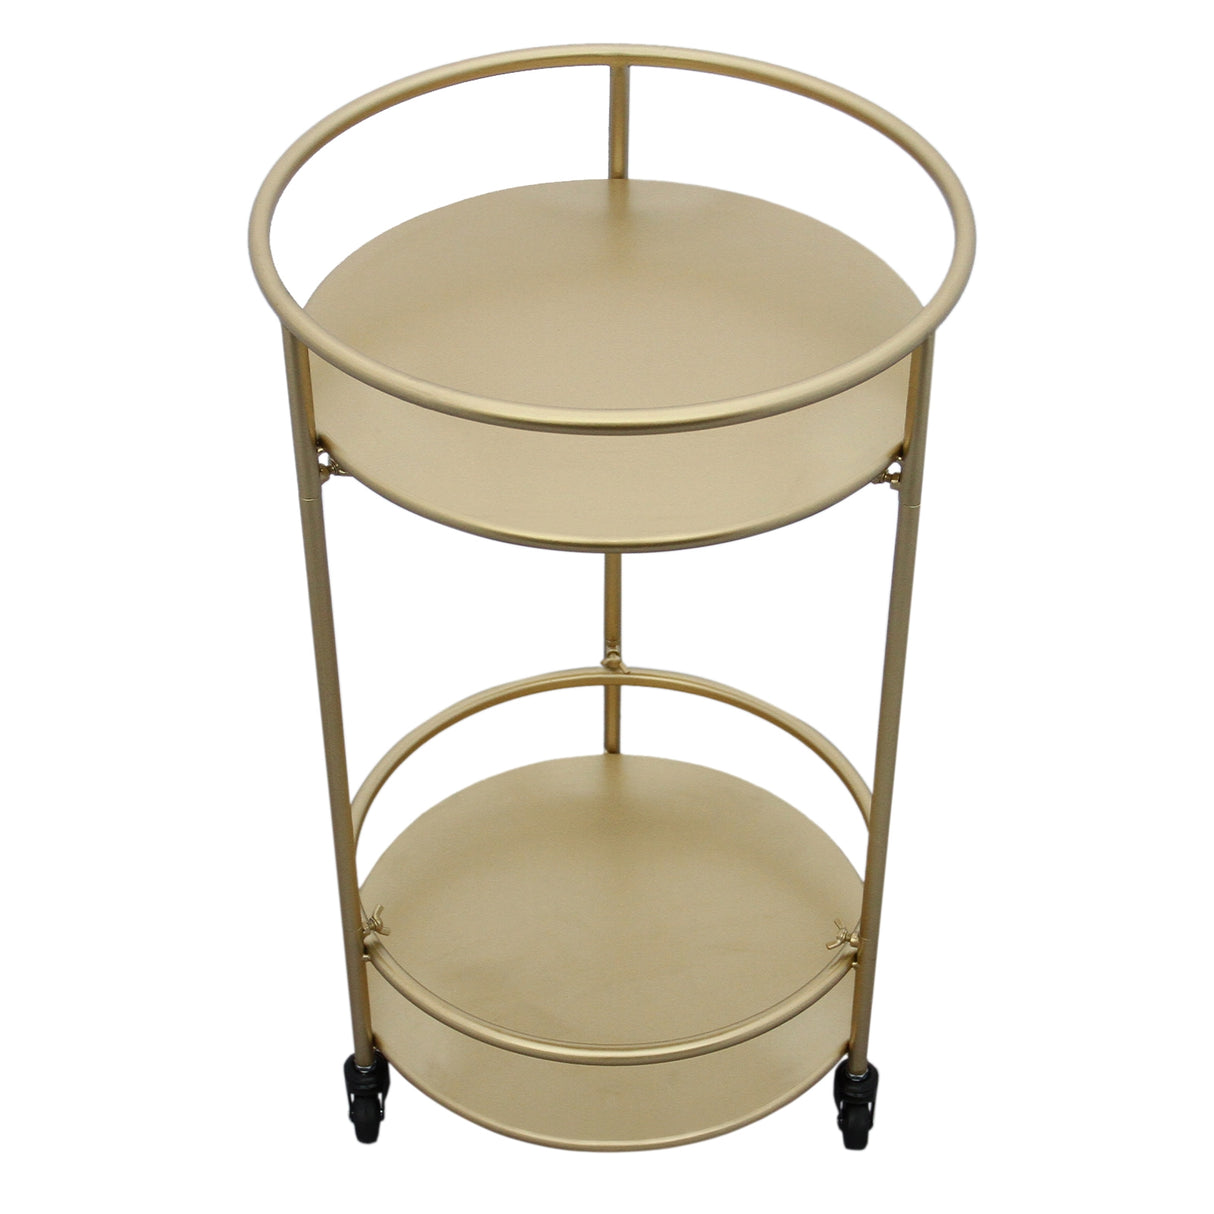 Gold Drinks Trolley Bar Cart - Small